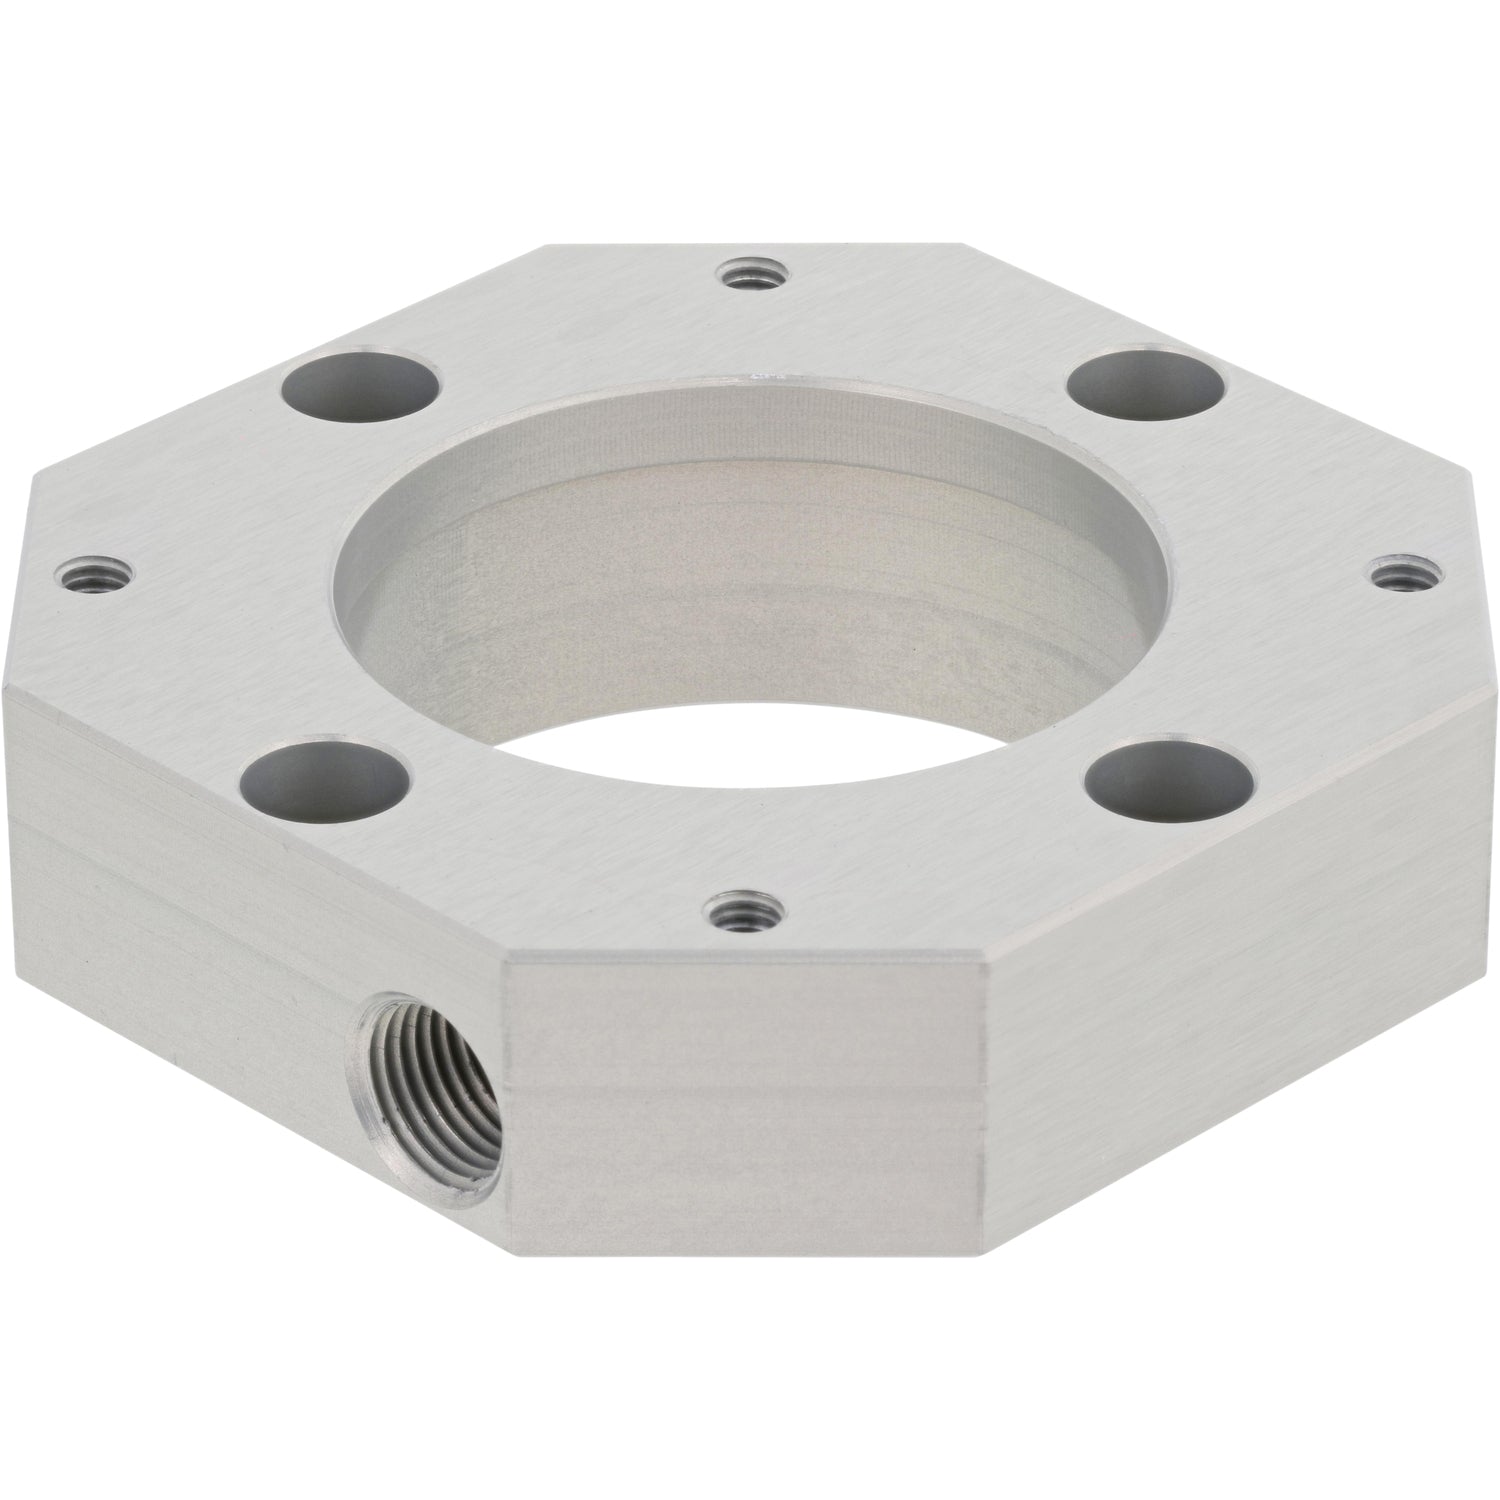 Octagonal part made of aluminum with a large center hole, four smaller through-holes and four even smaller threaded holes on the top surface. The part is on a white background.